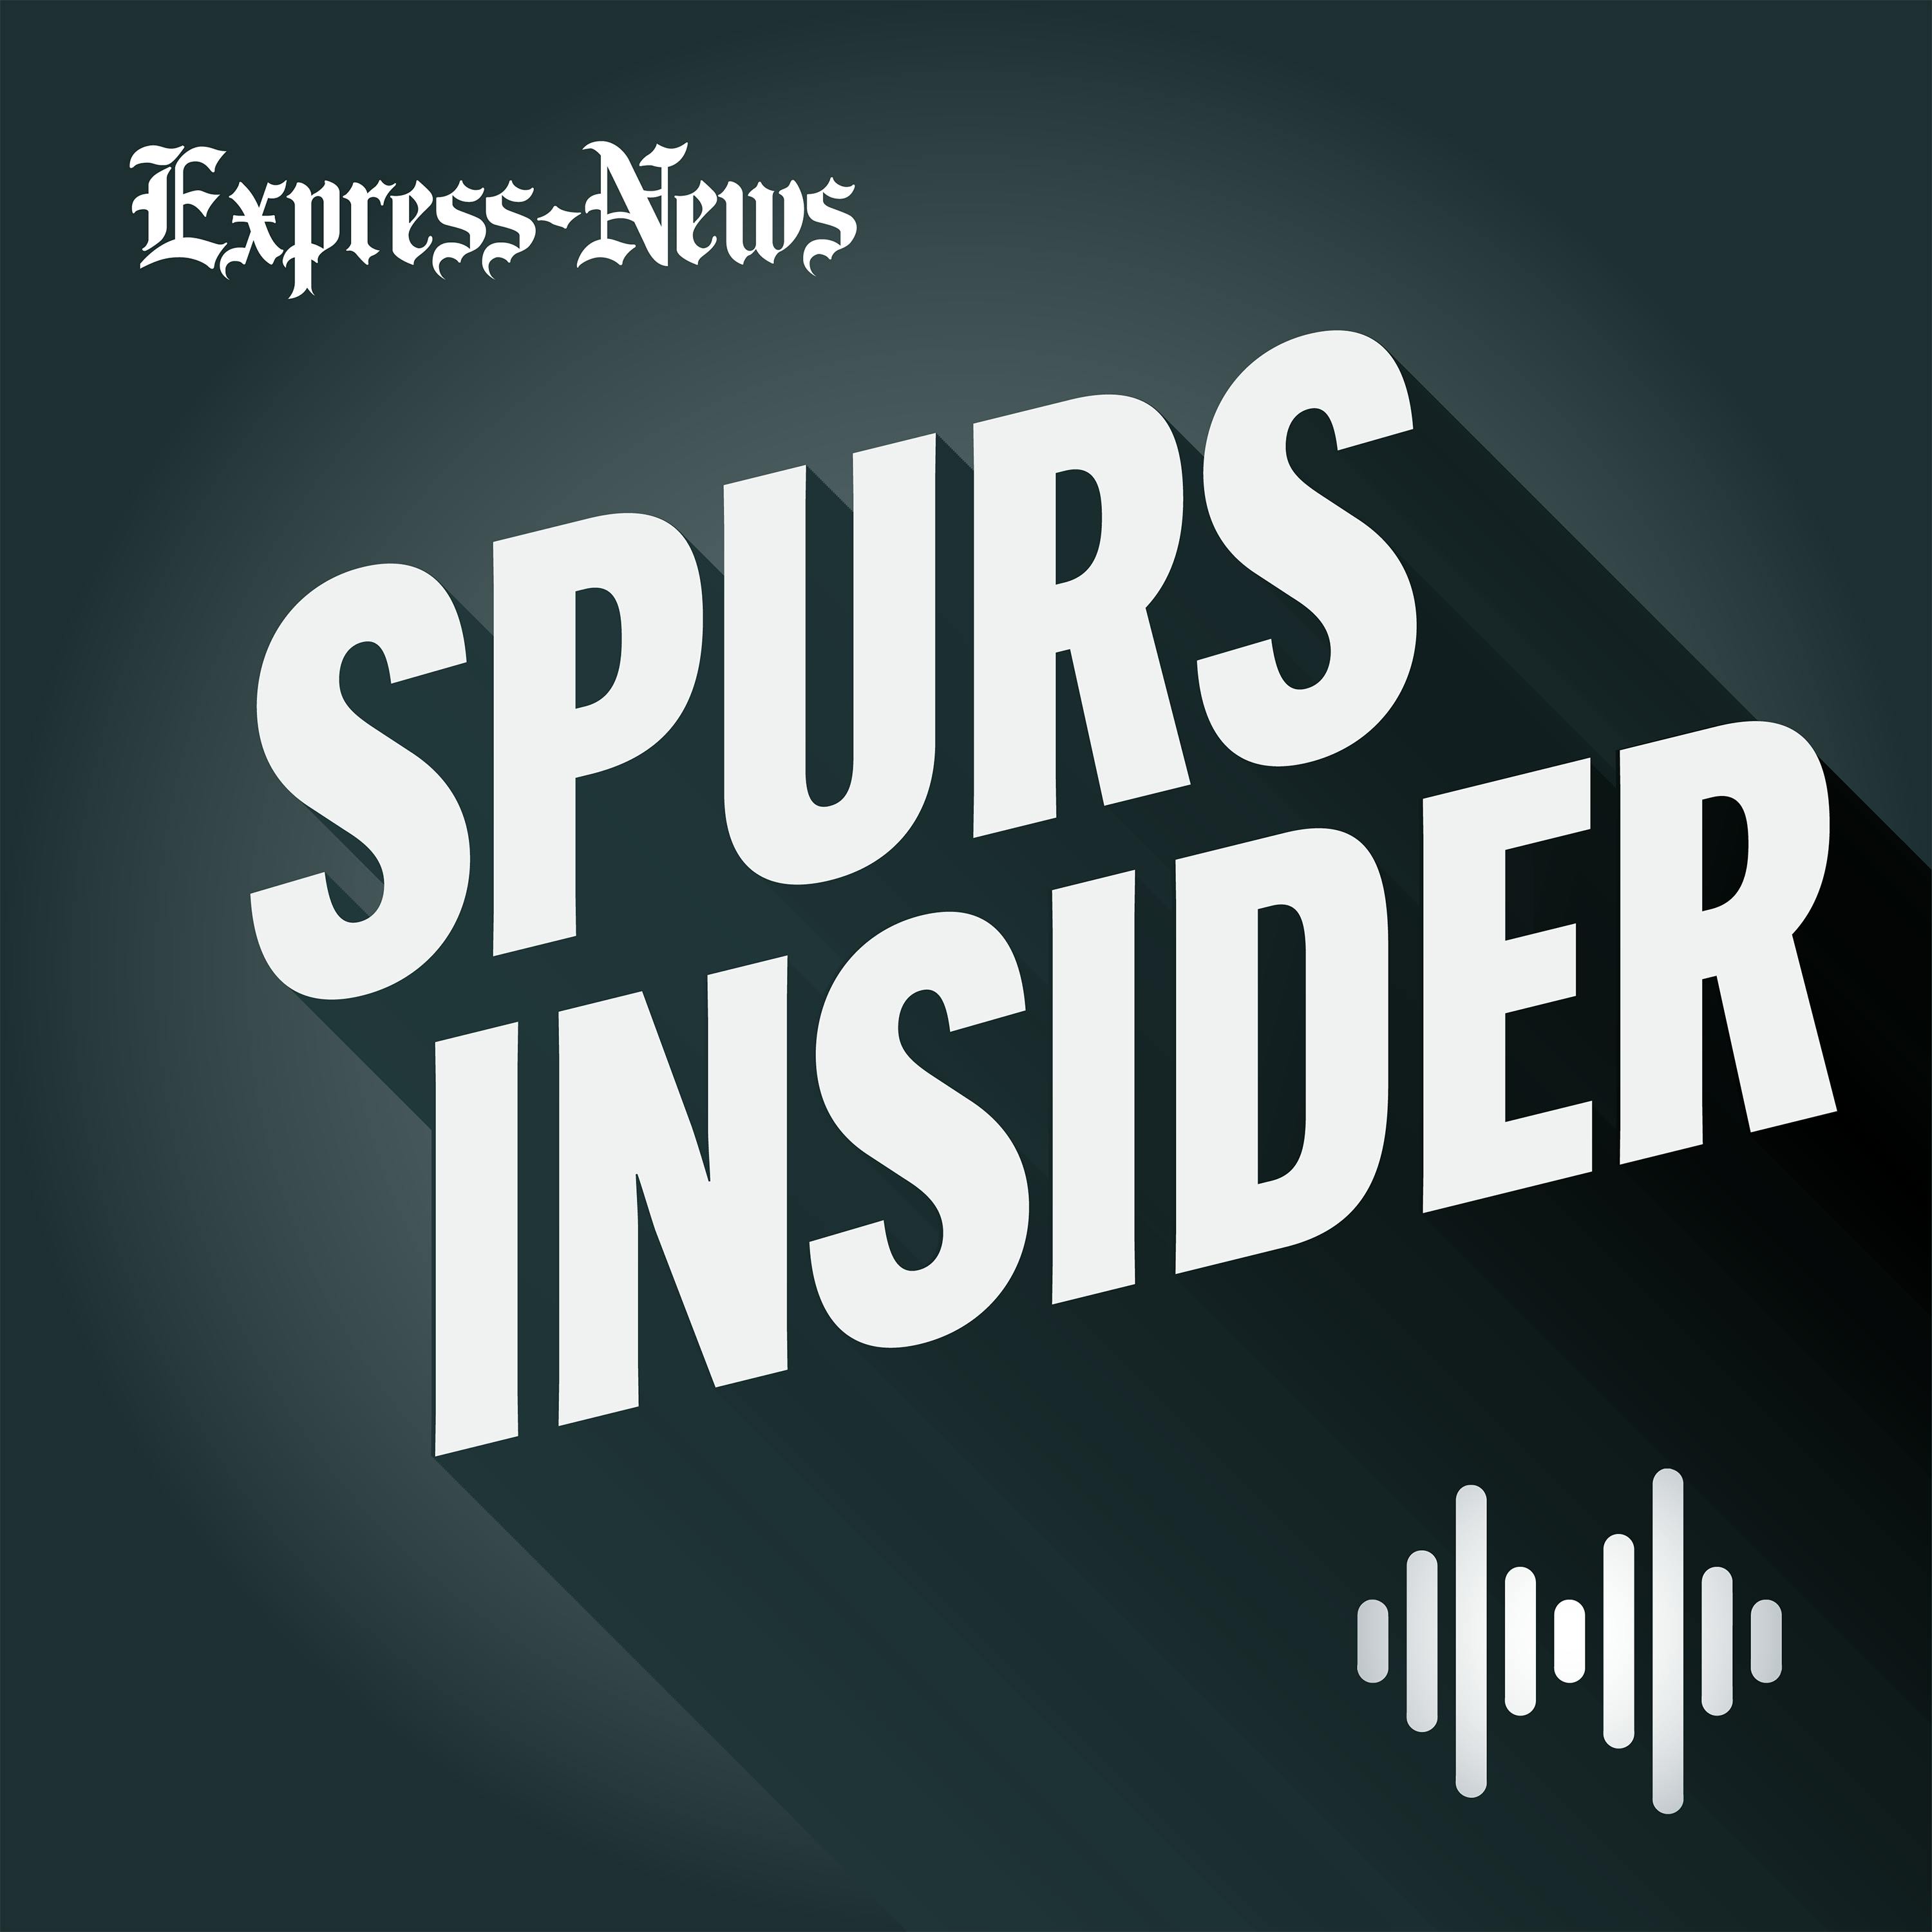 Episode 74: Is the West so bad that the Spurs make the playoffs?